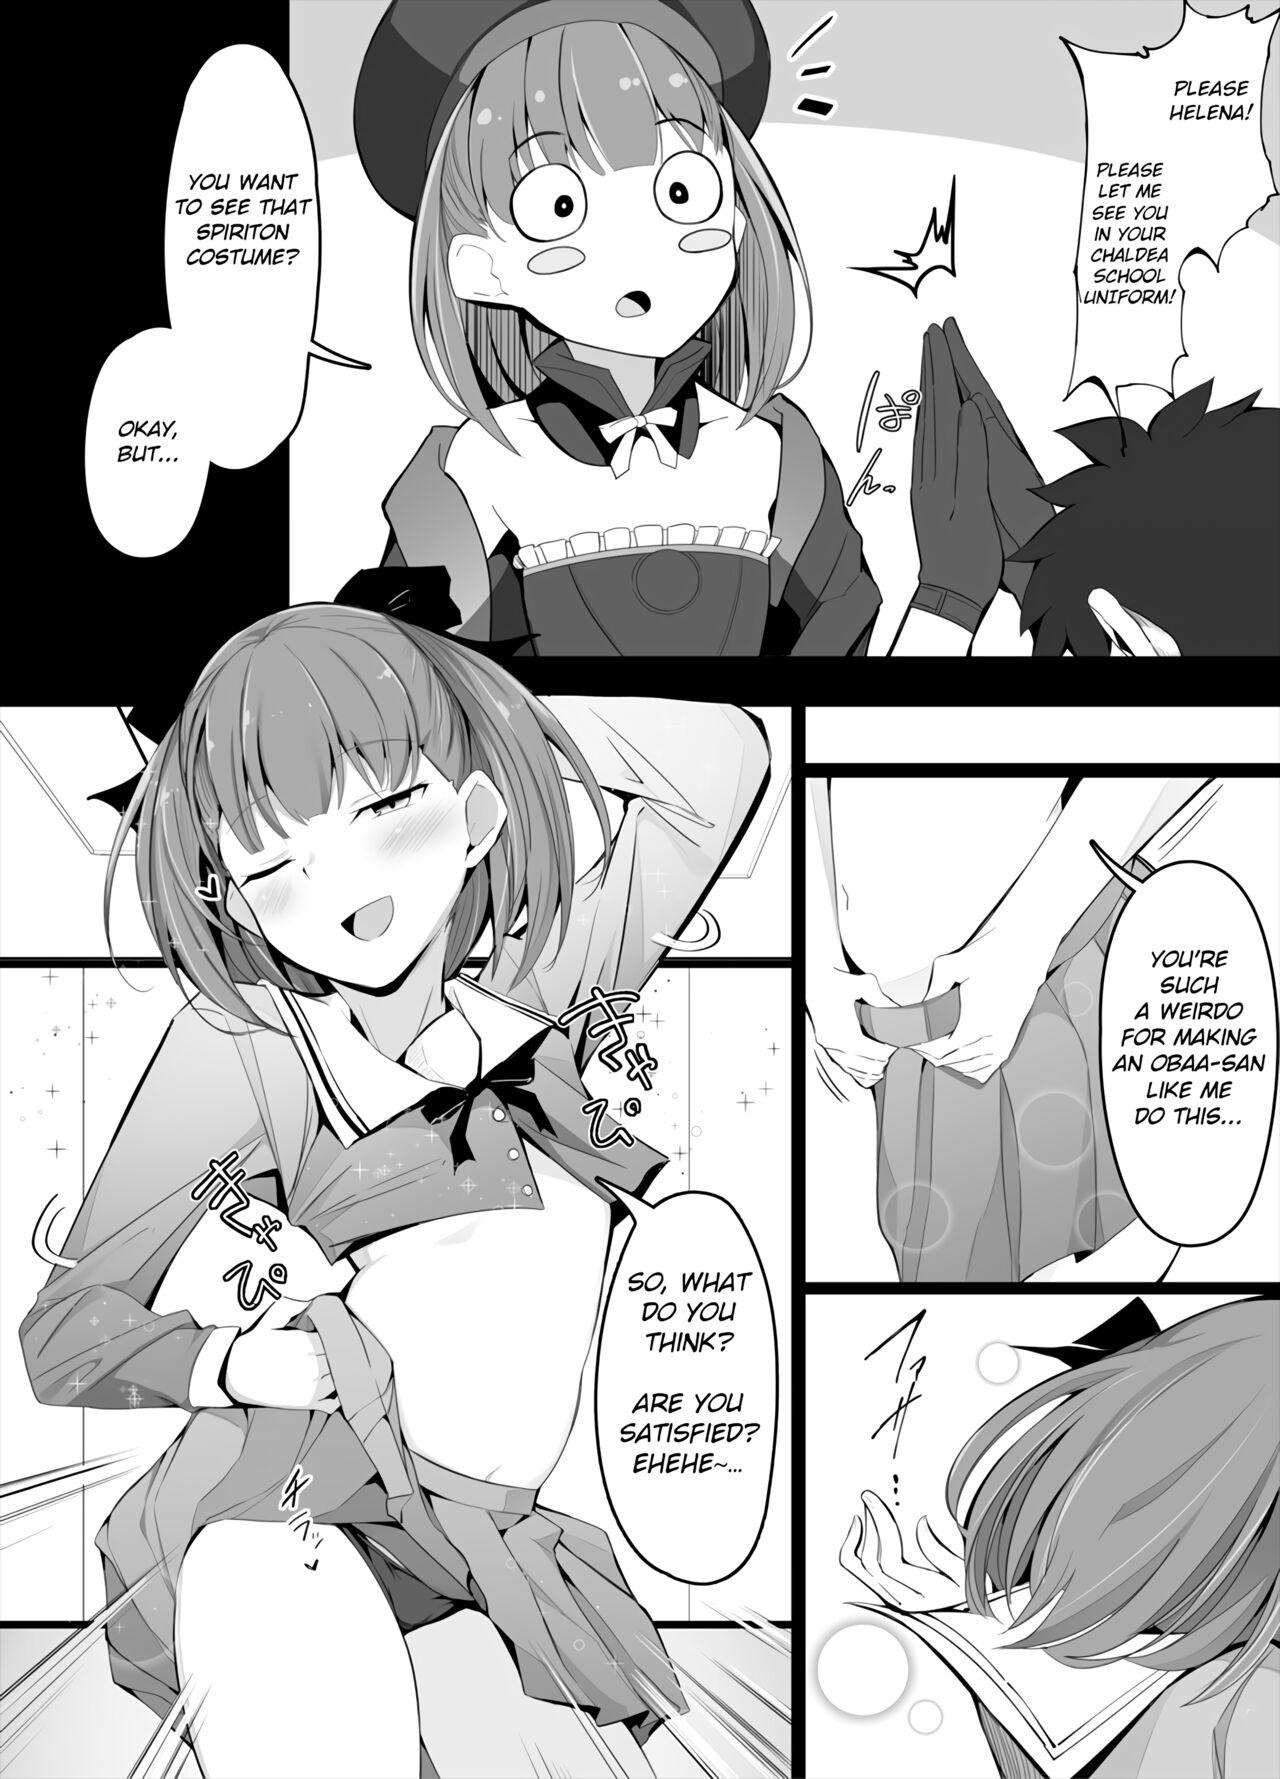 Porno Amateur I Teased Helena Obaa-san and It Was Scarier Than I Thought! - Fate grand order Viet Nam - Page 4